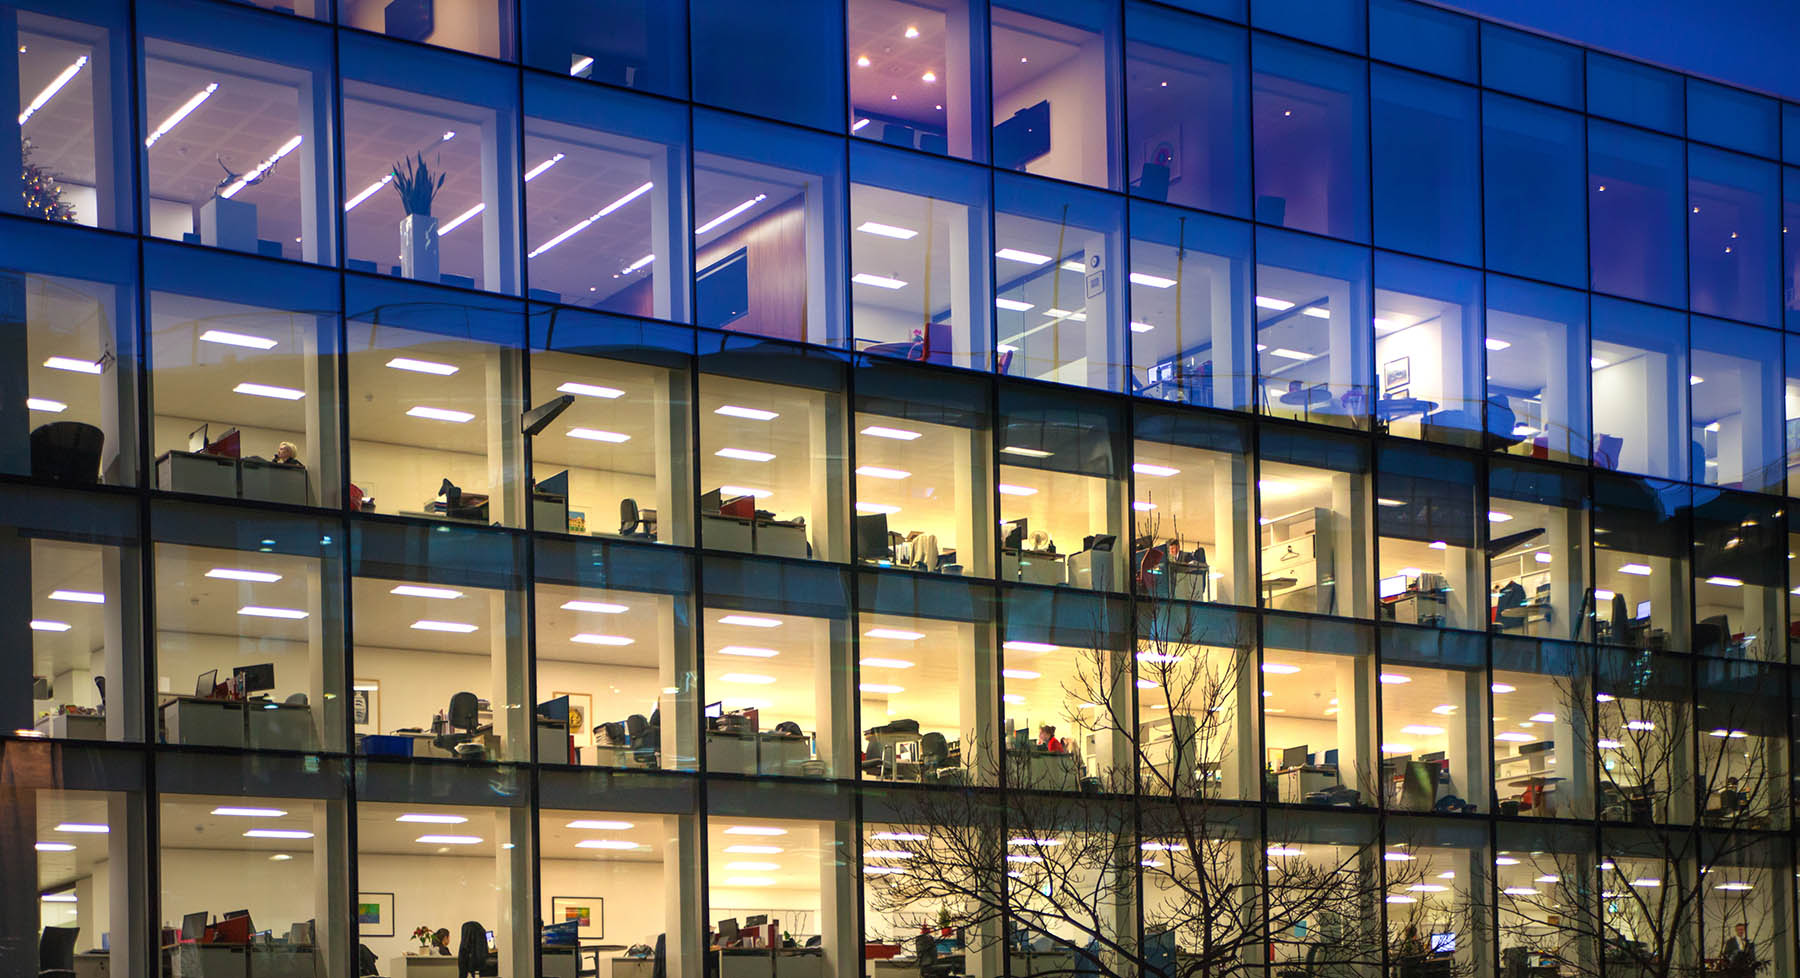 LED Lighting: A Tool for Enhancing Workplace Productivity